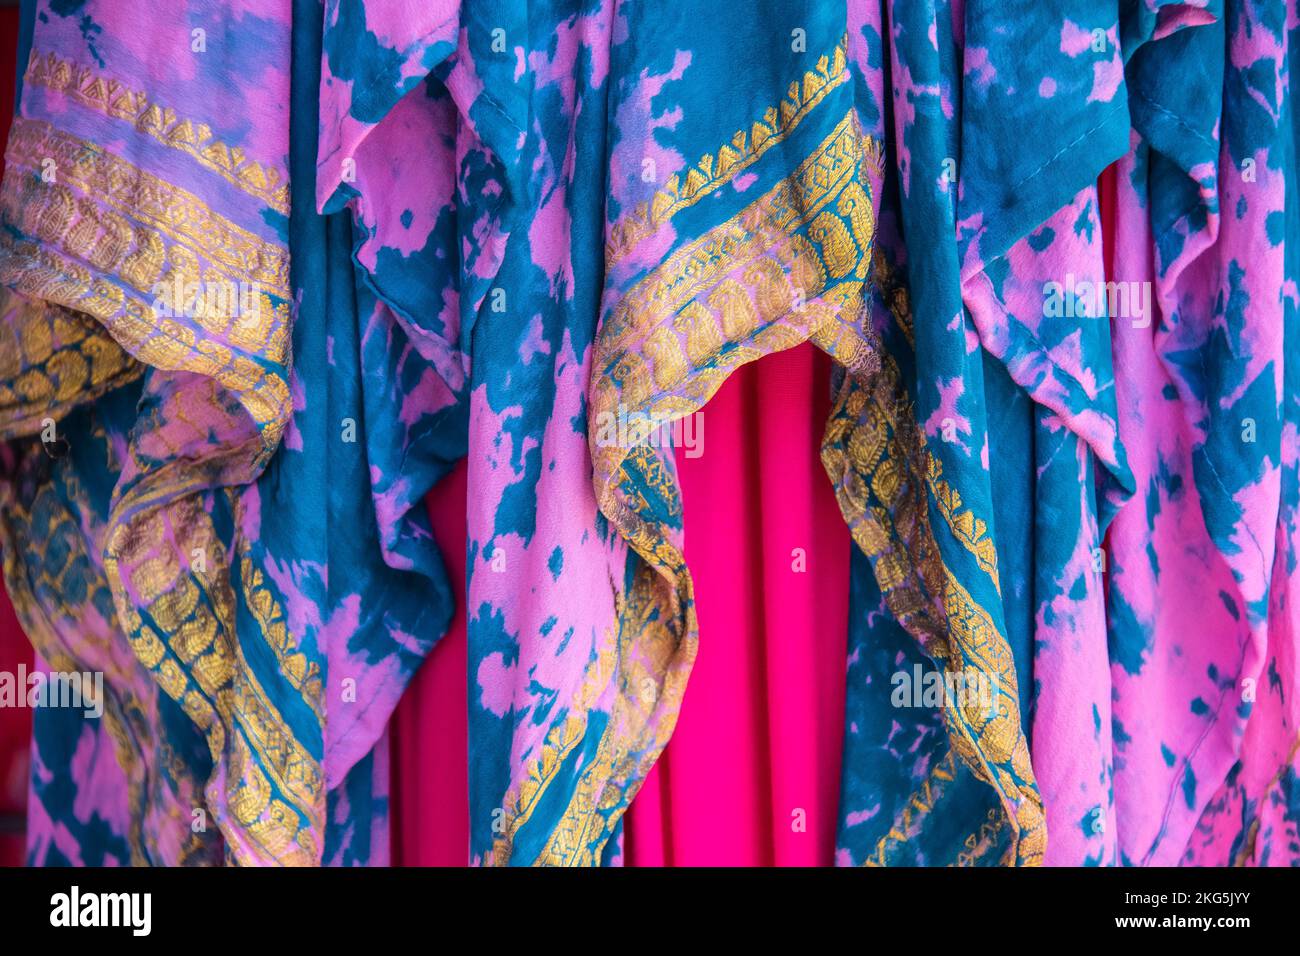 Background of colorful draped overlapping fabrics in pinks and turquoise with gold yellow embroidered design -boho or gypsy look Stock Photo